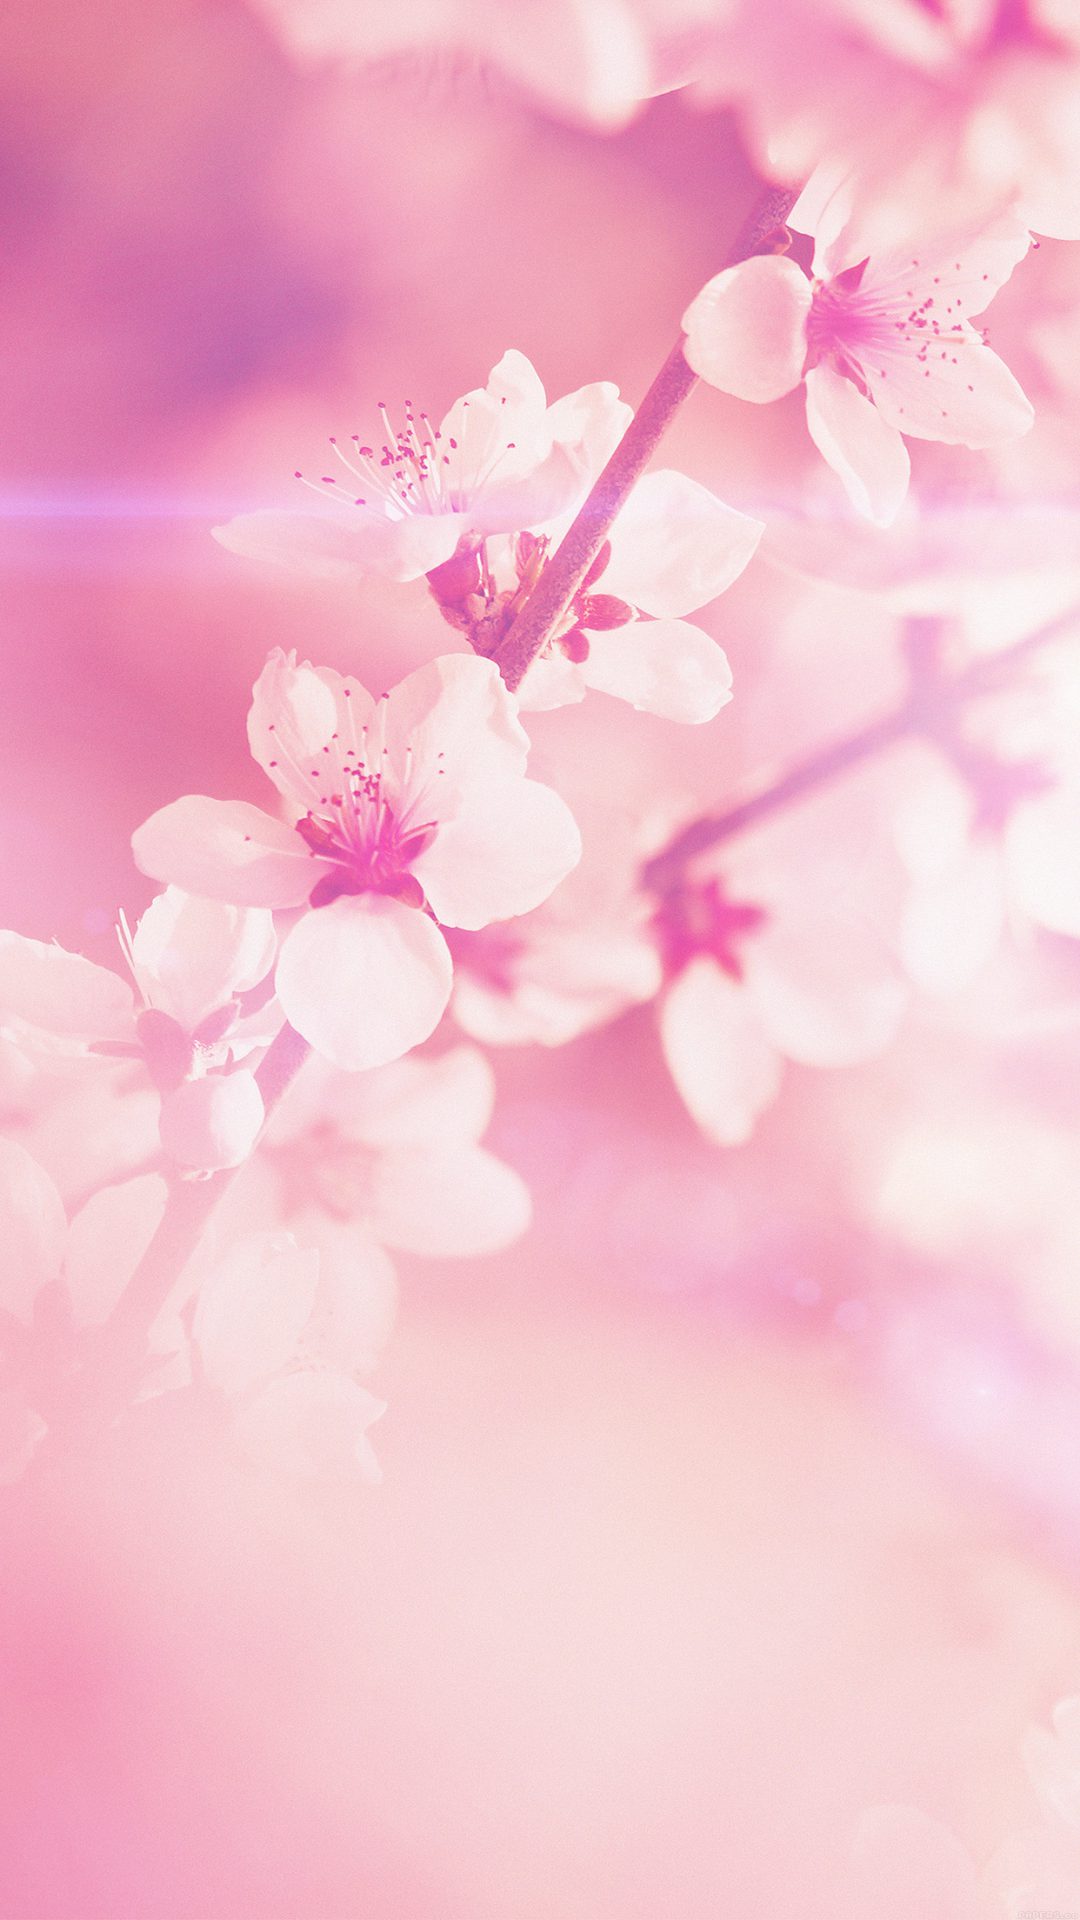 Spring Flower Pink Cherry Blossom Flare Nature